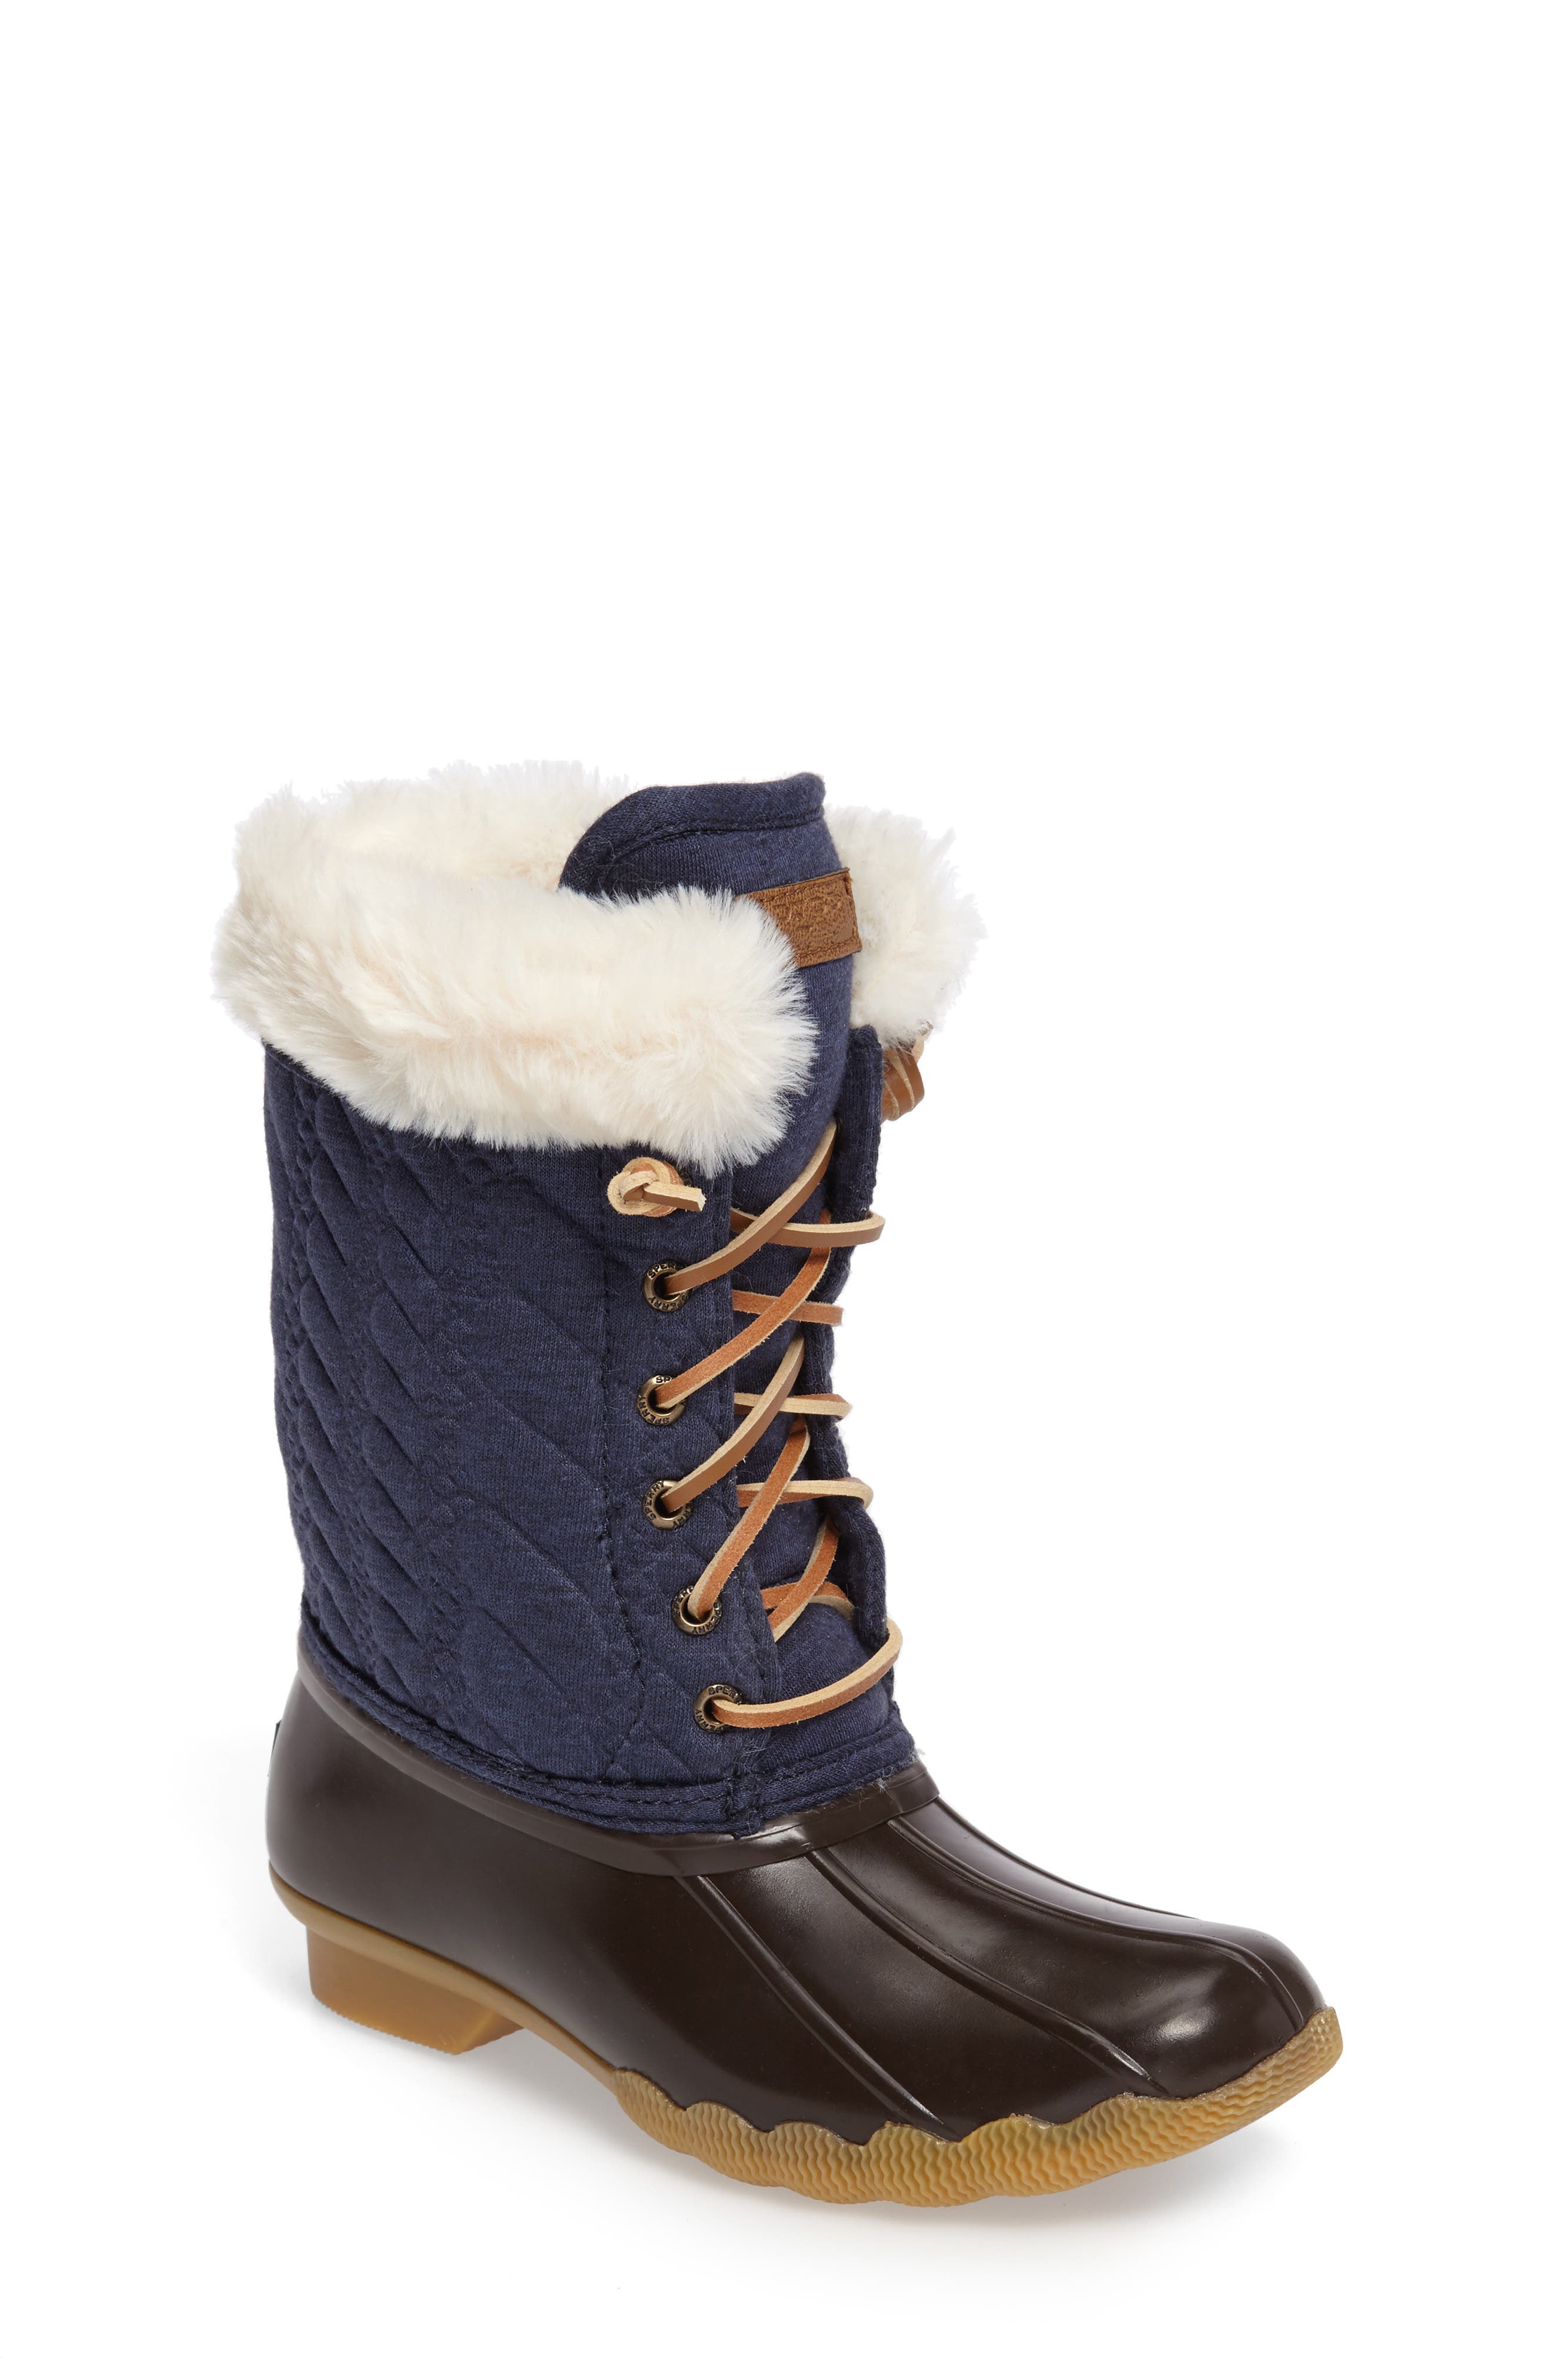 sperry boots with fur